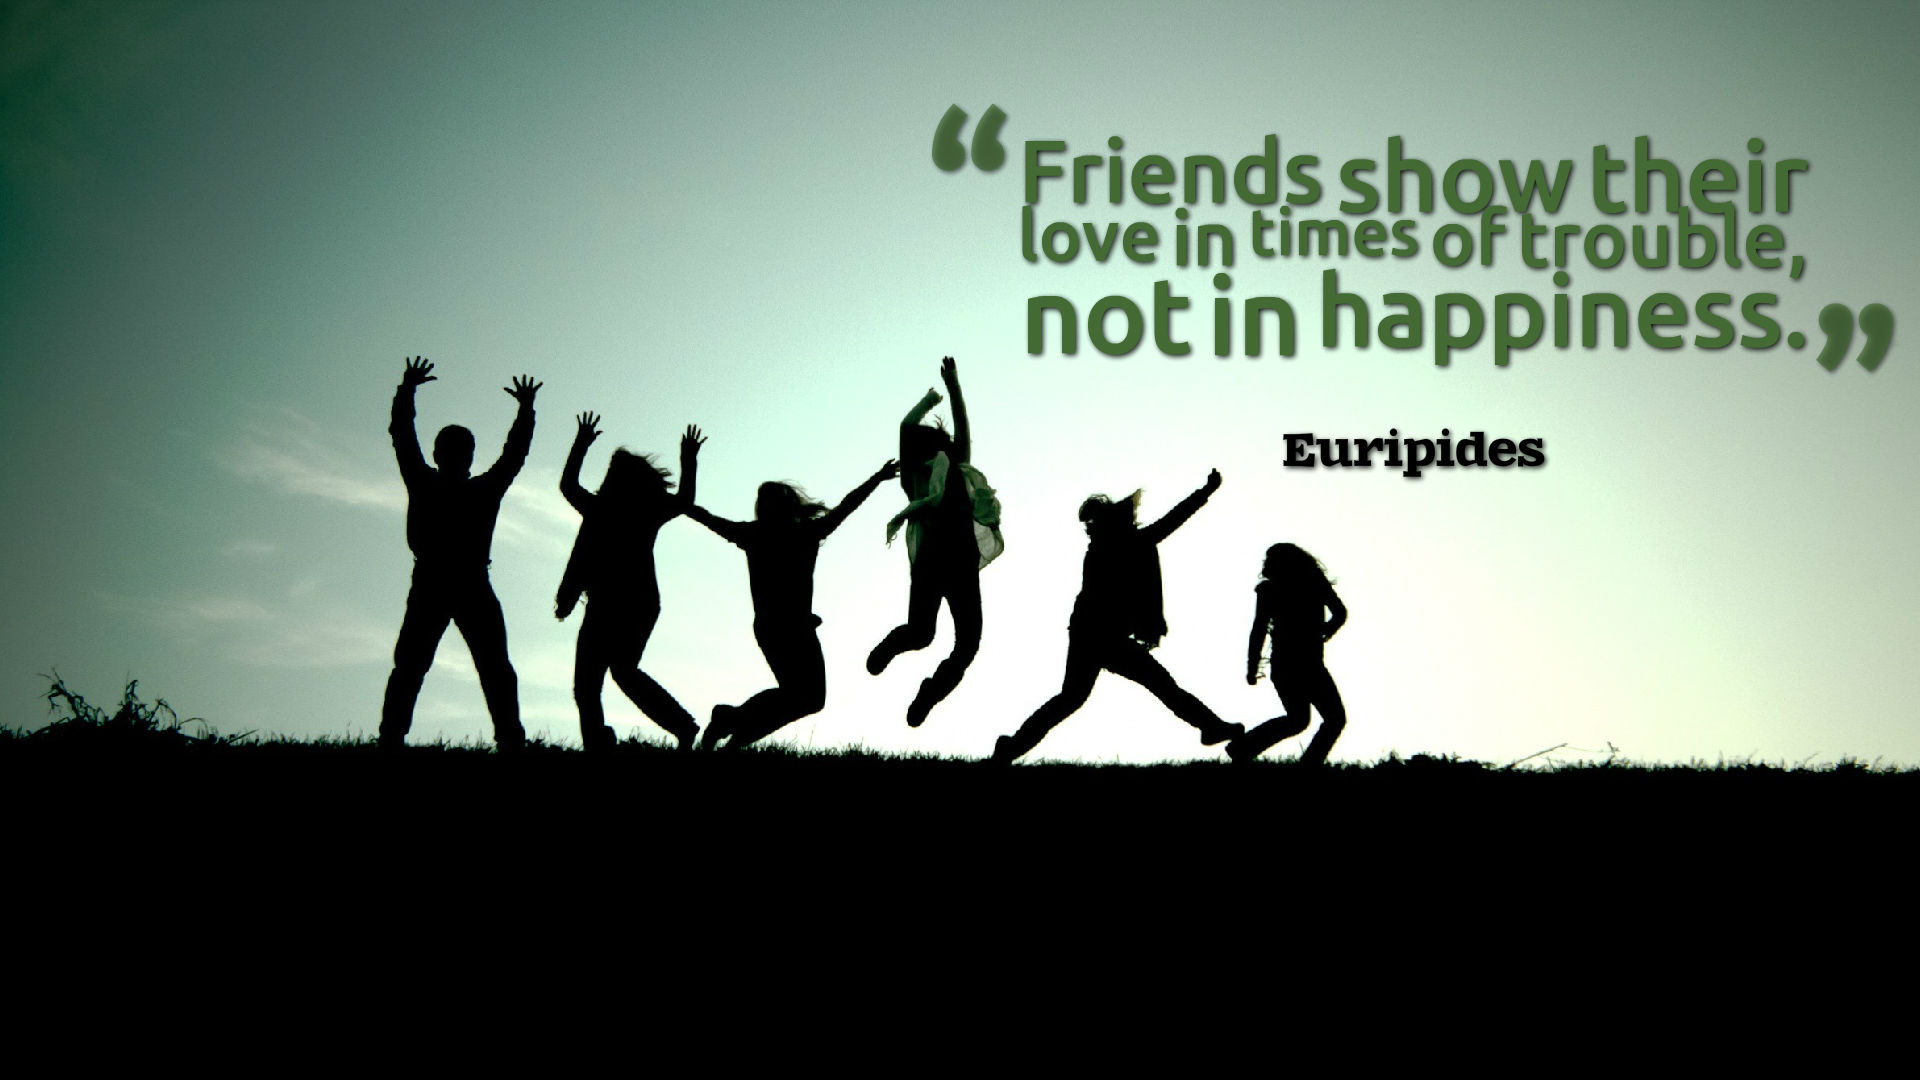 quotes wallpaper hd,people in nature,text,social group,friendship,youth